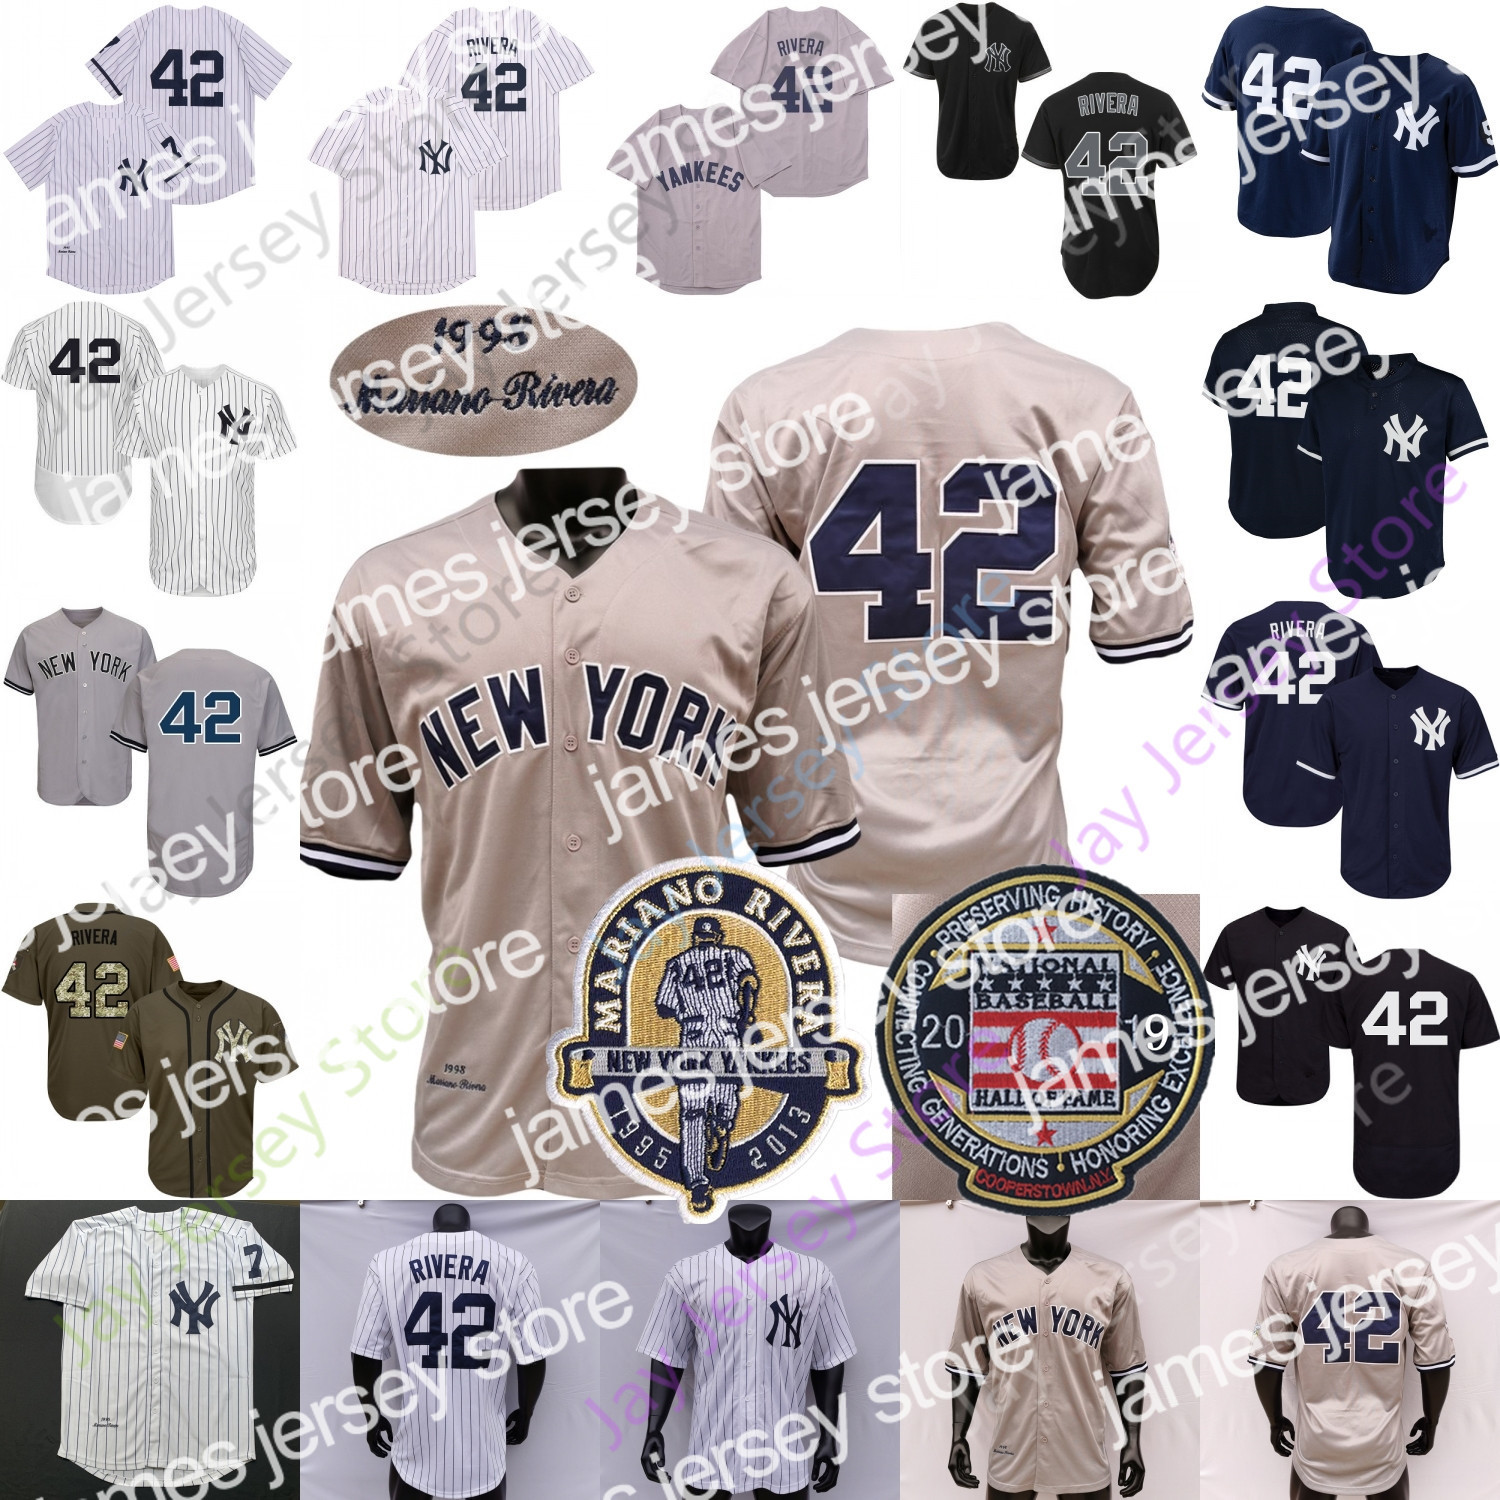 

James Mariano Rivera Jersey Vintage 1995 White Pinstripe 1998 Grey Turn Back Black Fashion 602 Saves 2019 Hall Of Fame Retirement Patch, Salute to service